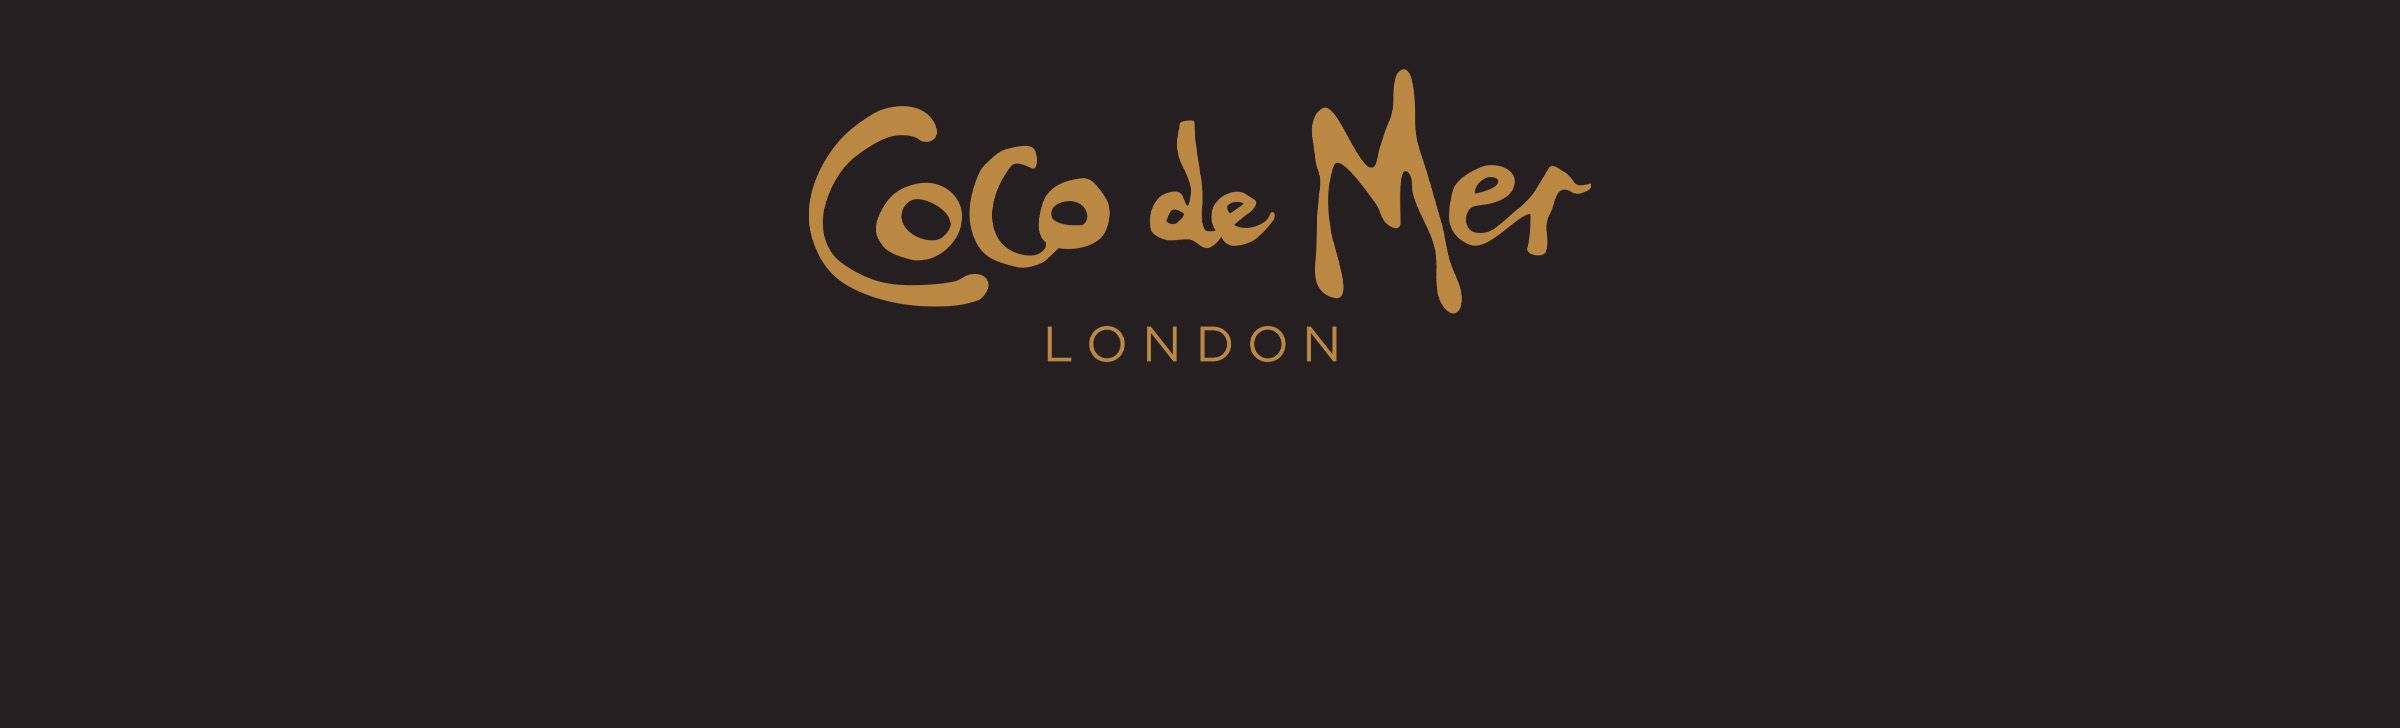 coco de mer banner of a gold logo on a brown background